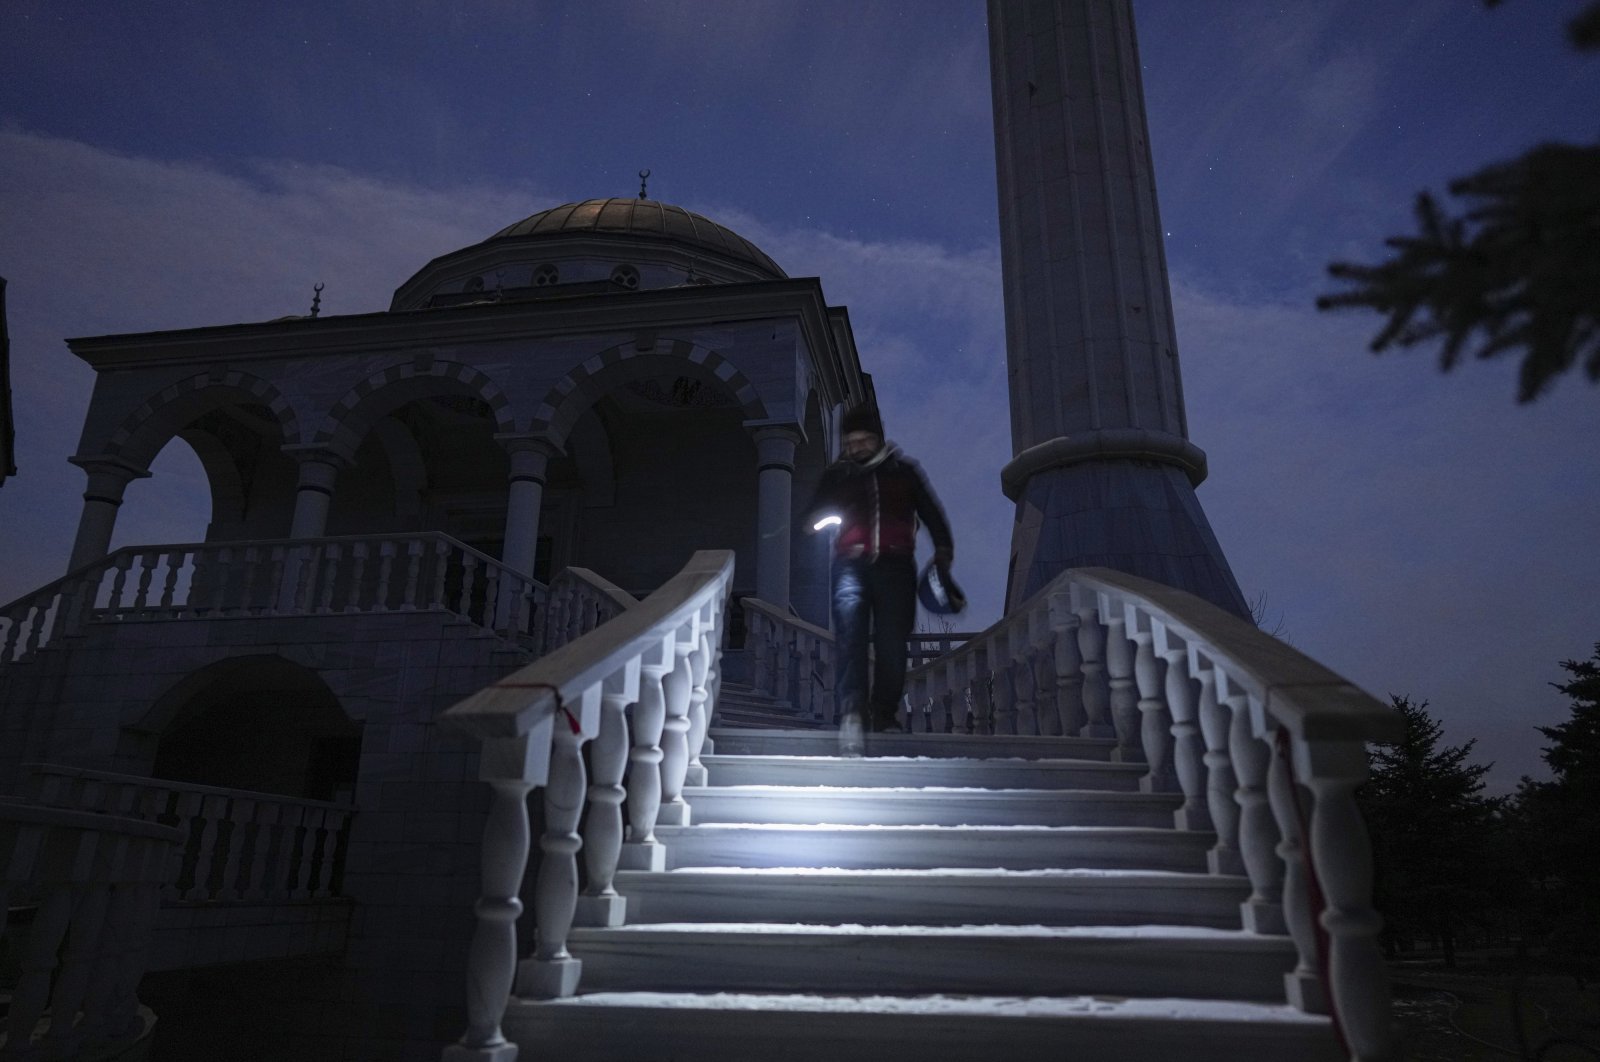 Turkish imam Mehmet Yüce walks down the steps after evening prayers in a mosque in Mariupol, Ukraine, March 12, 2022. (AP Photo)